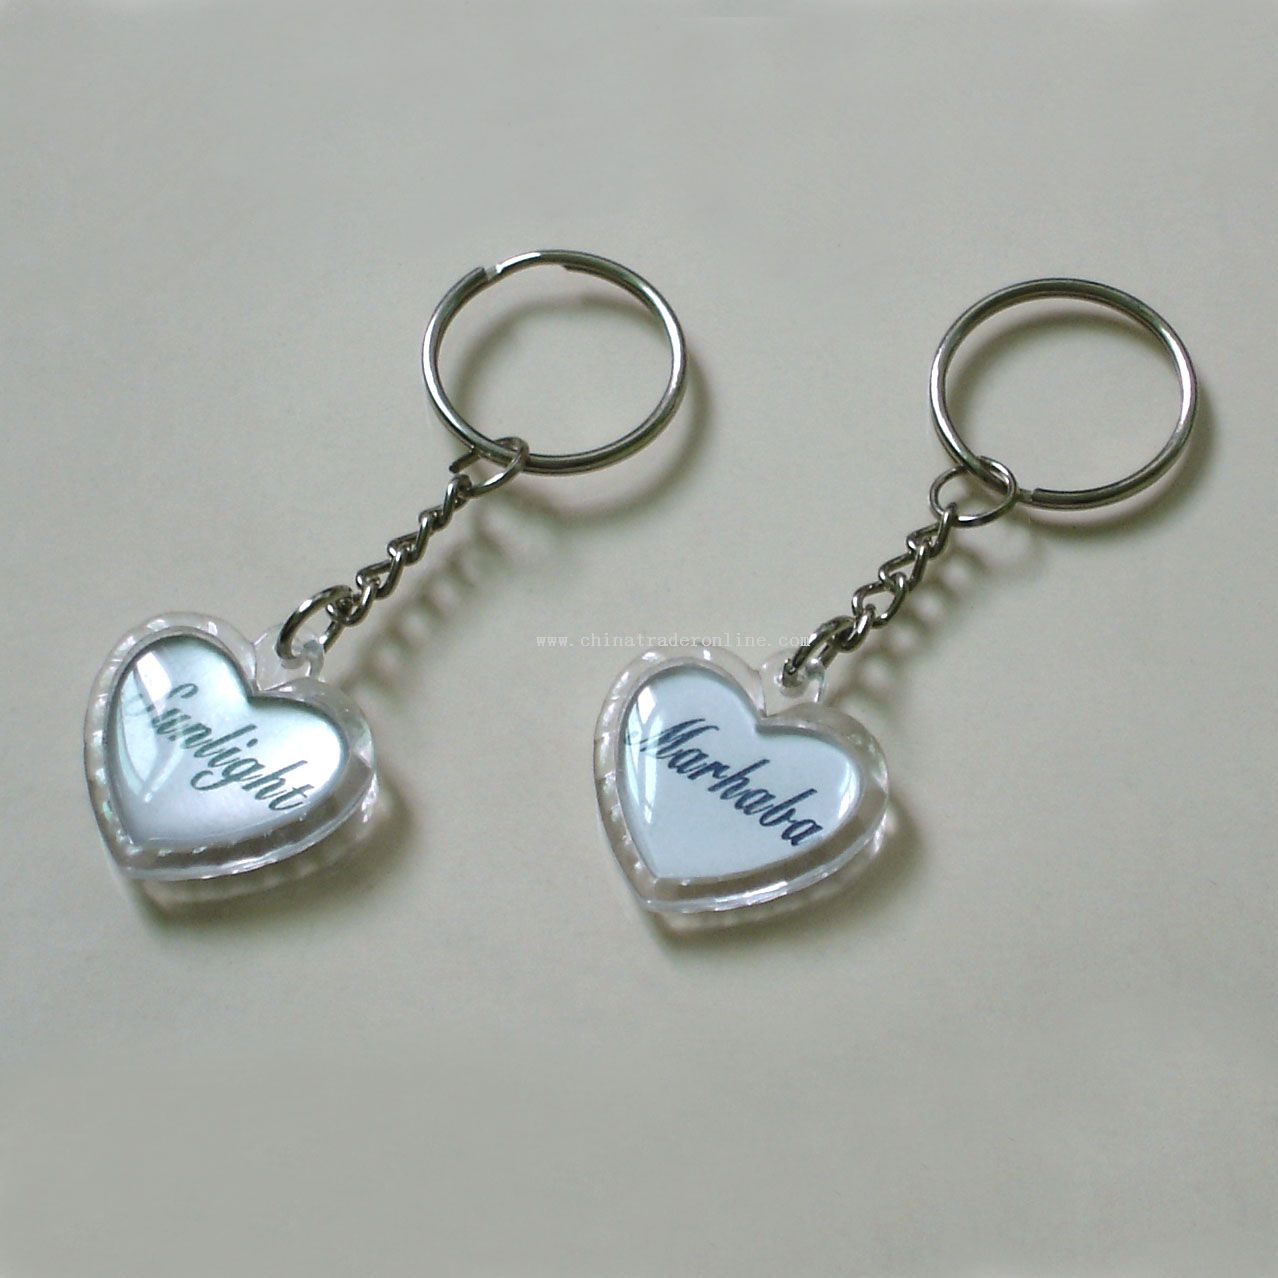 Acrylic keychain with cover